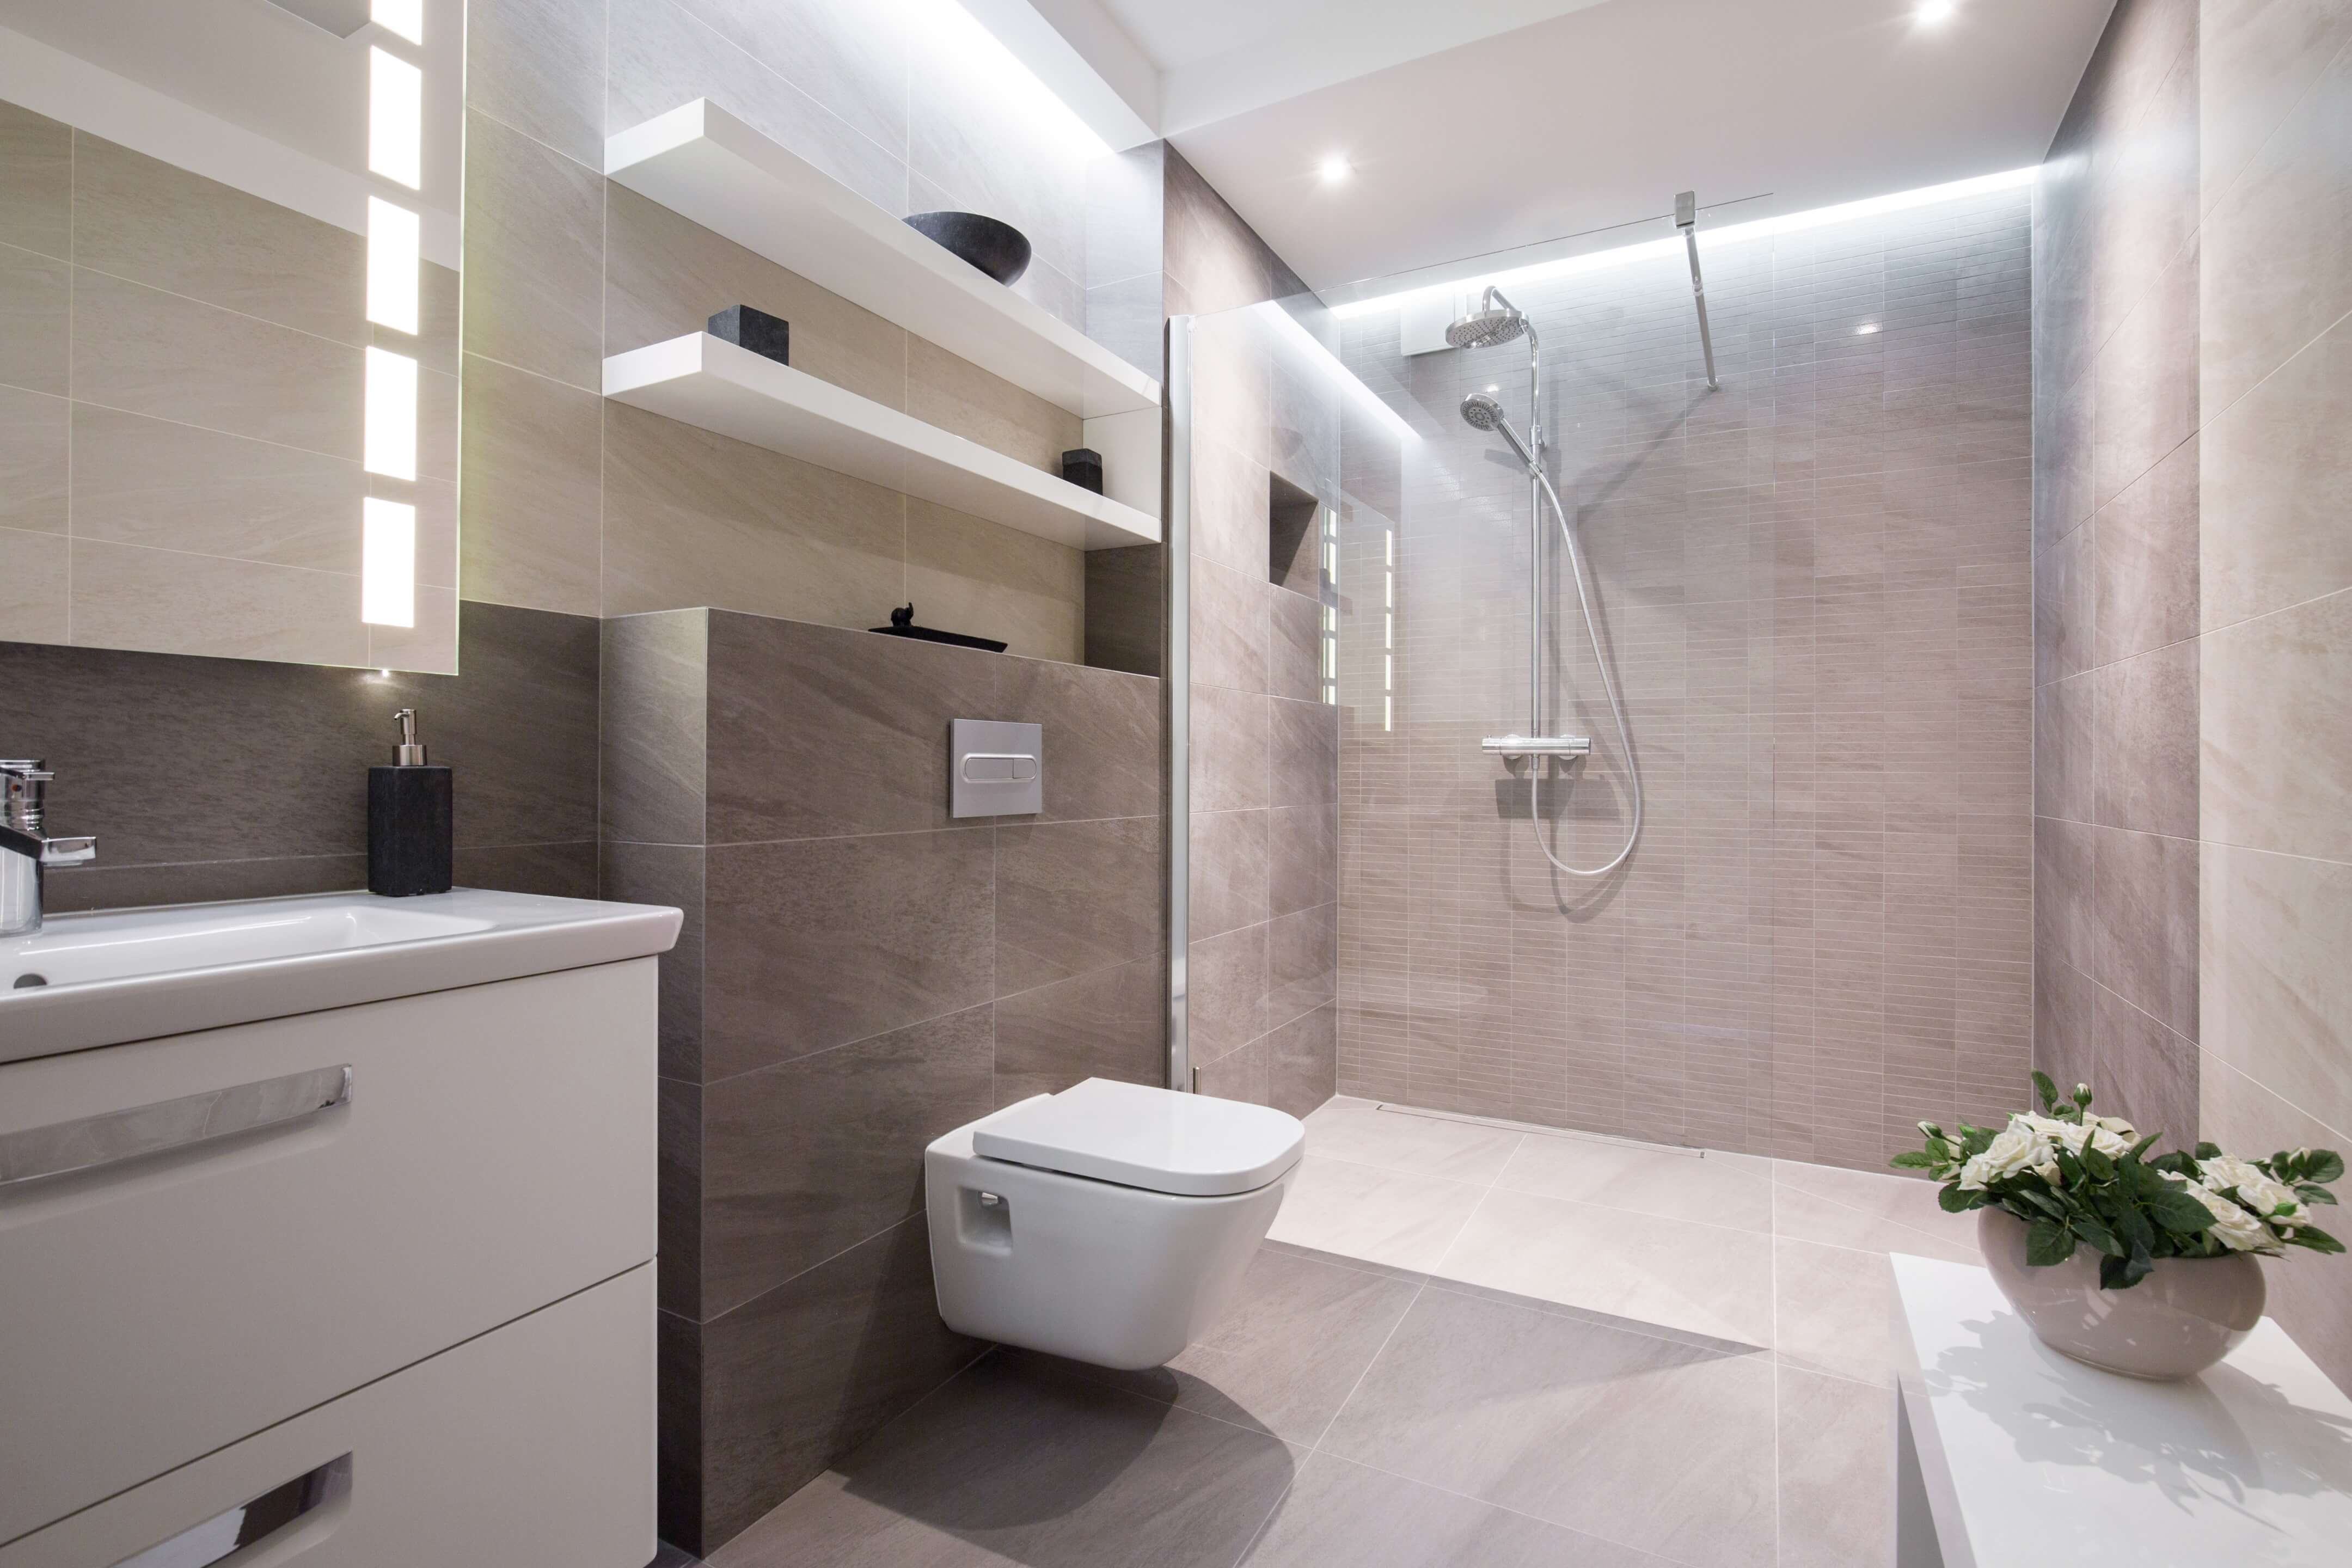 local bathroom fitters tower hamlets